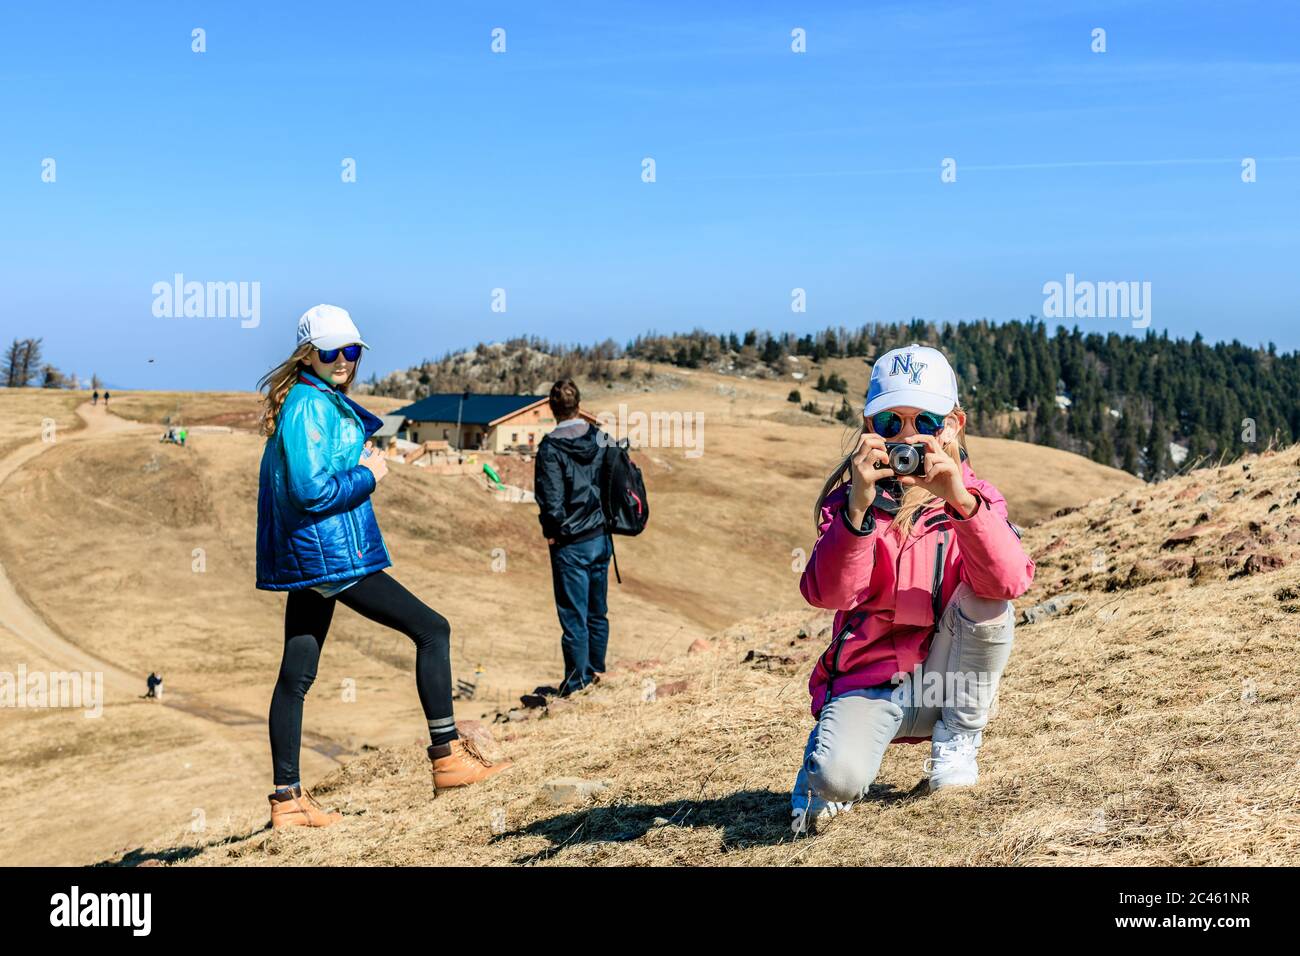 Young girl taking photos in alpine scenery Stock Photo